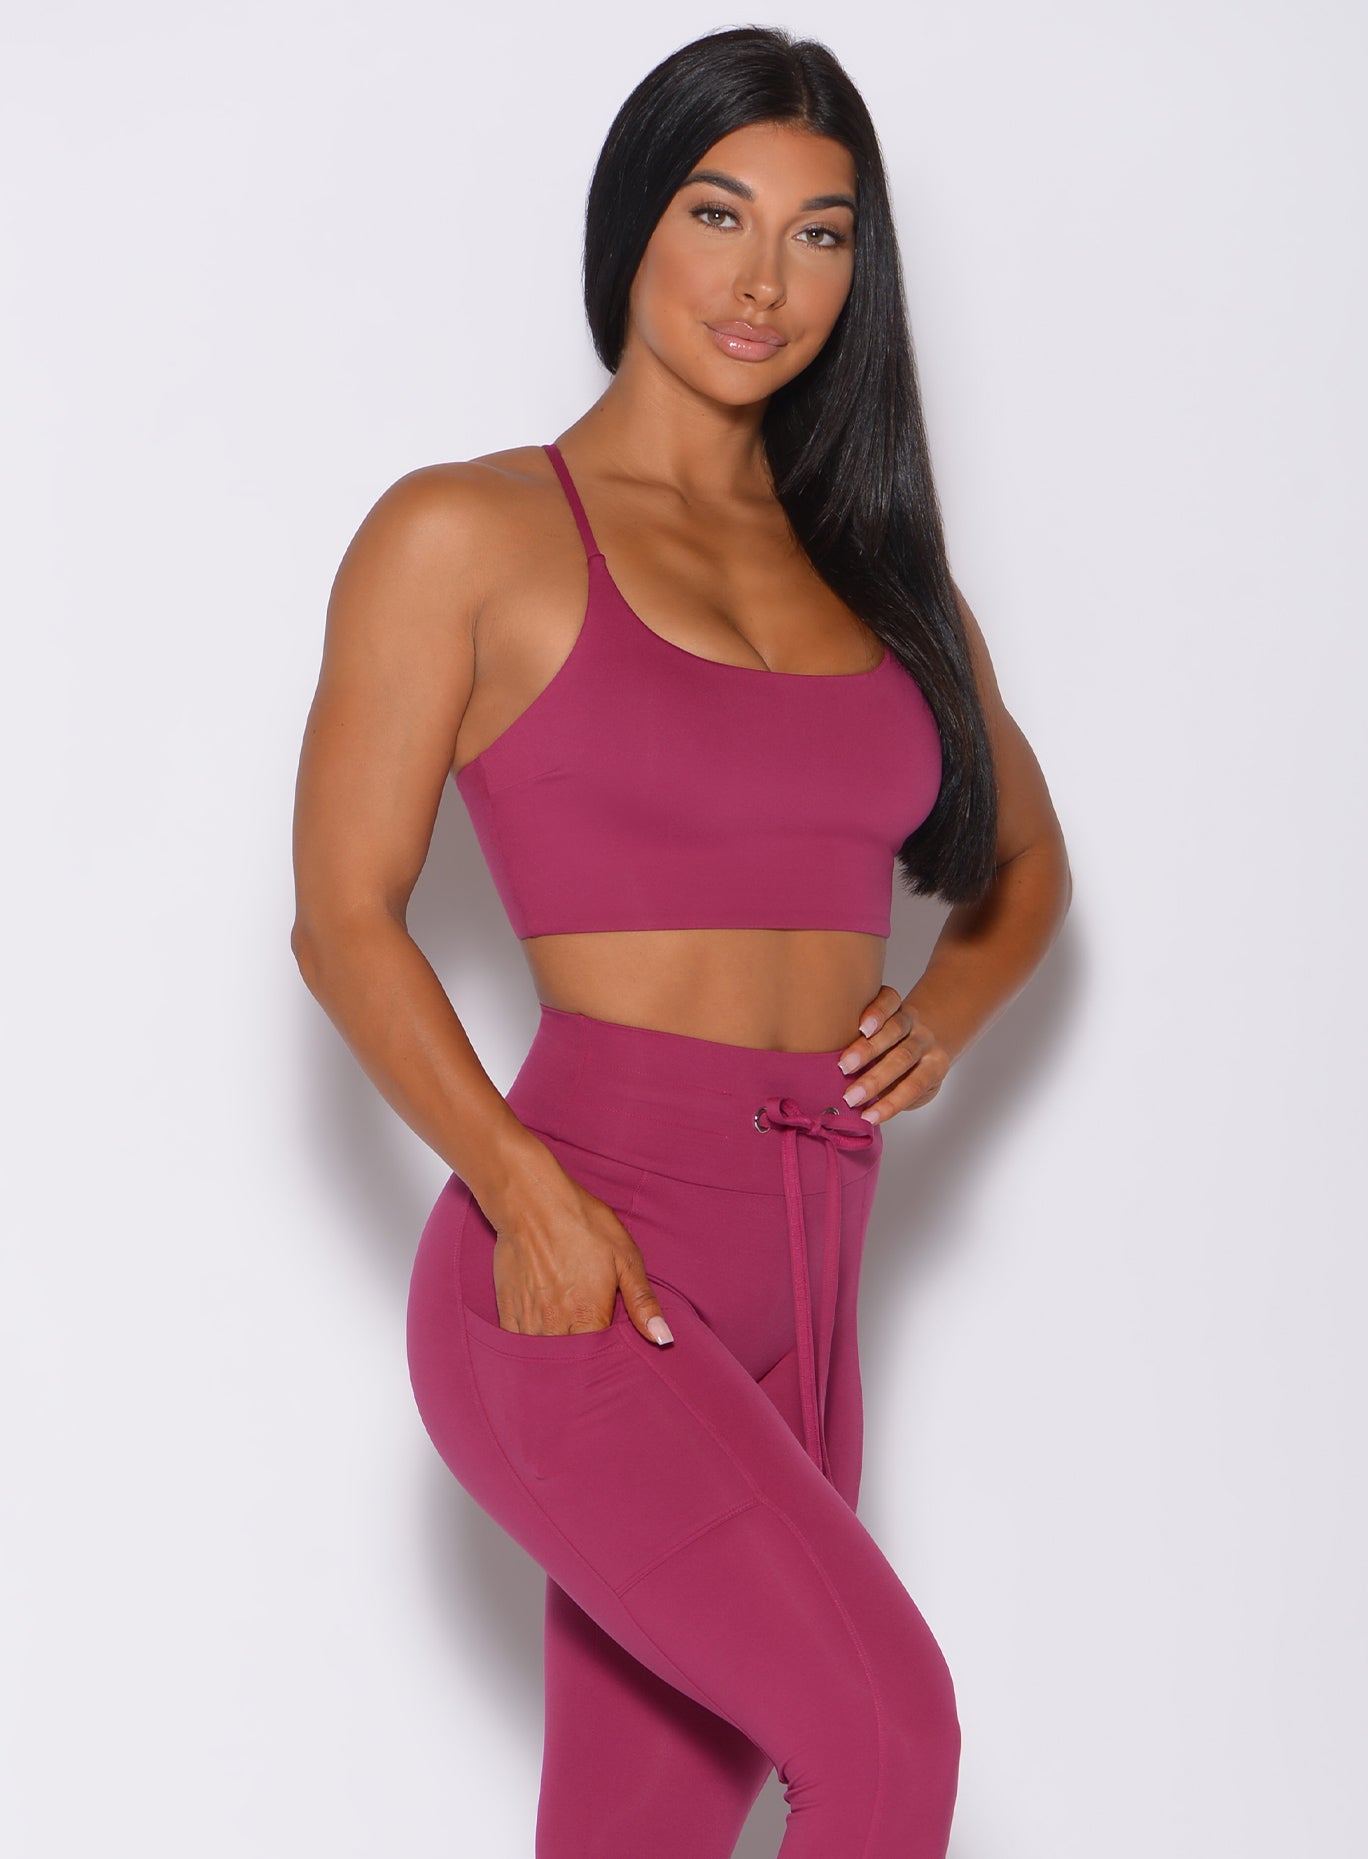 Right side profile view of a model angled right wearing our cross fit sports bra in berry good color and a matching leggings